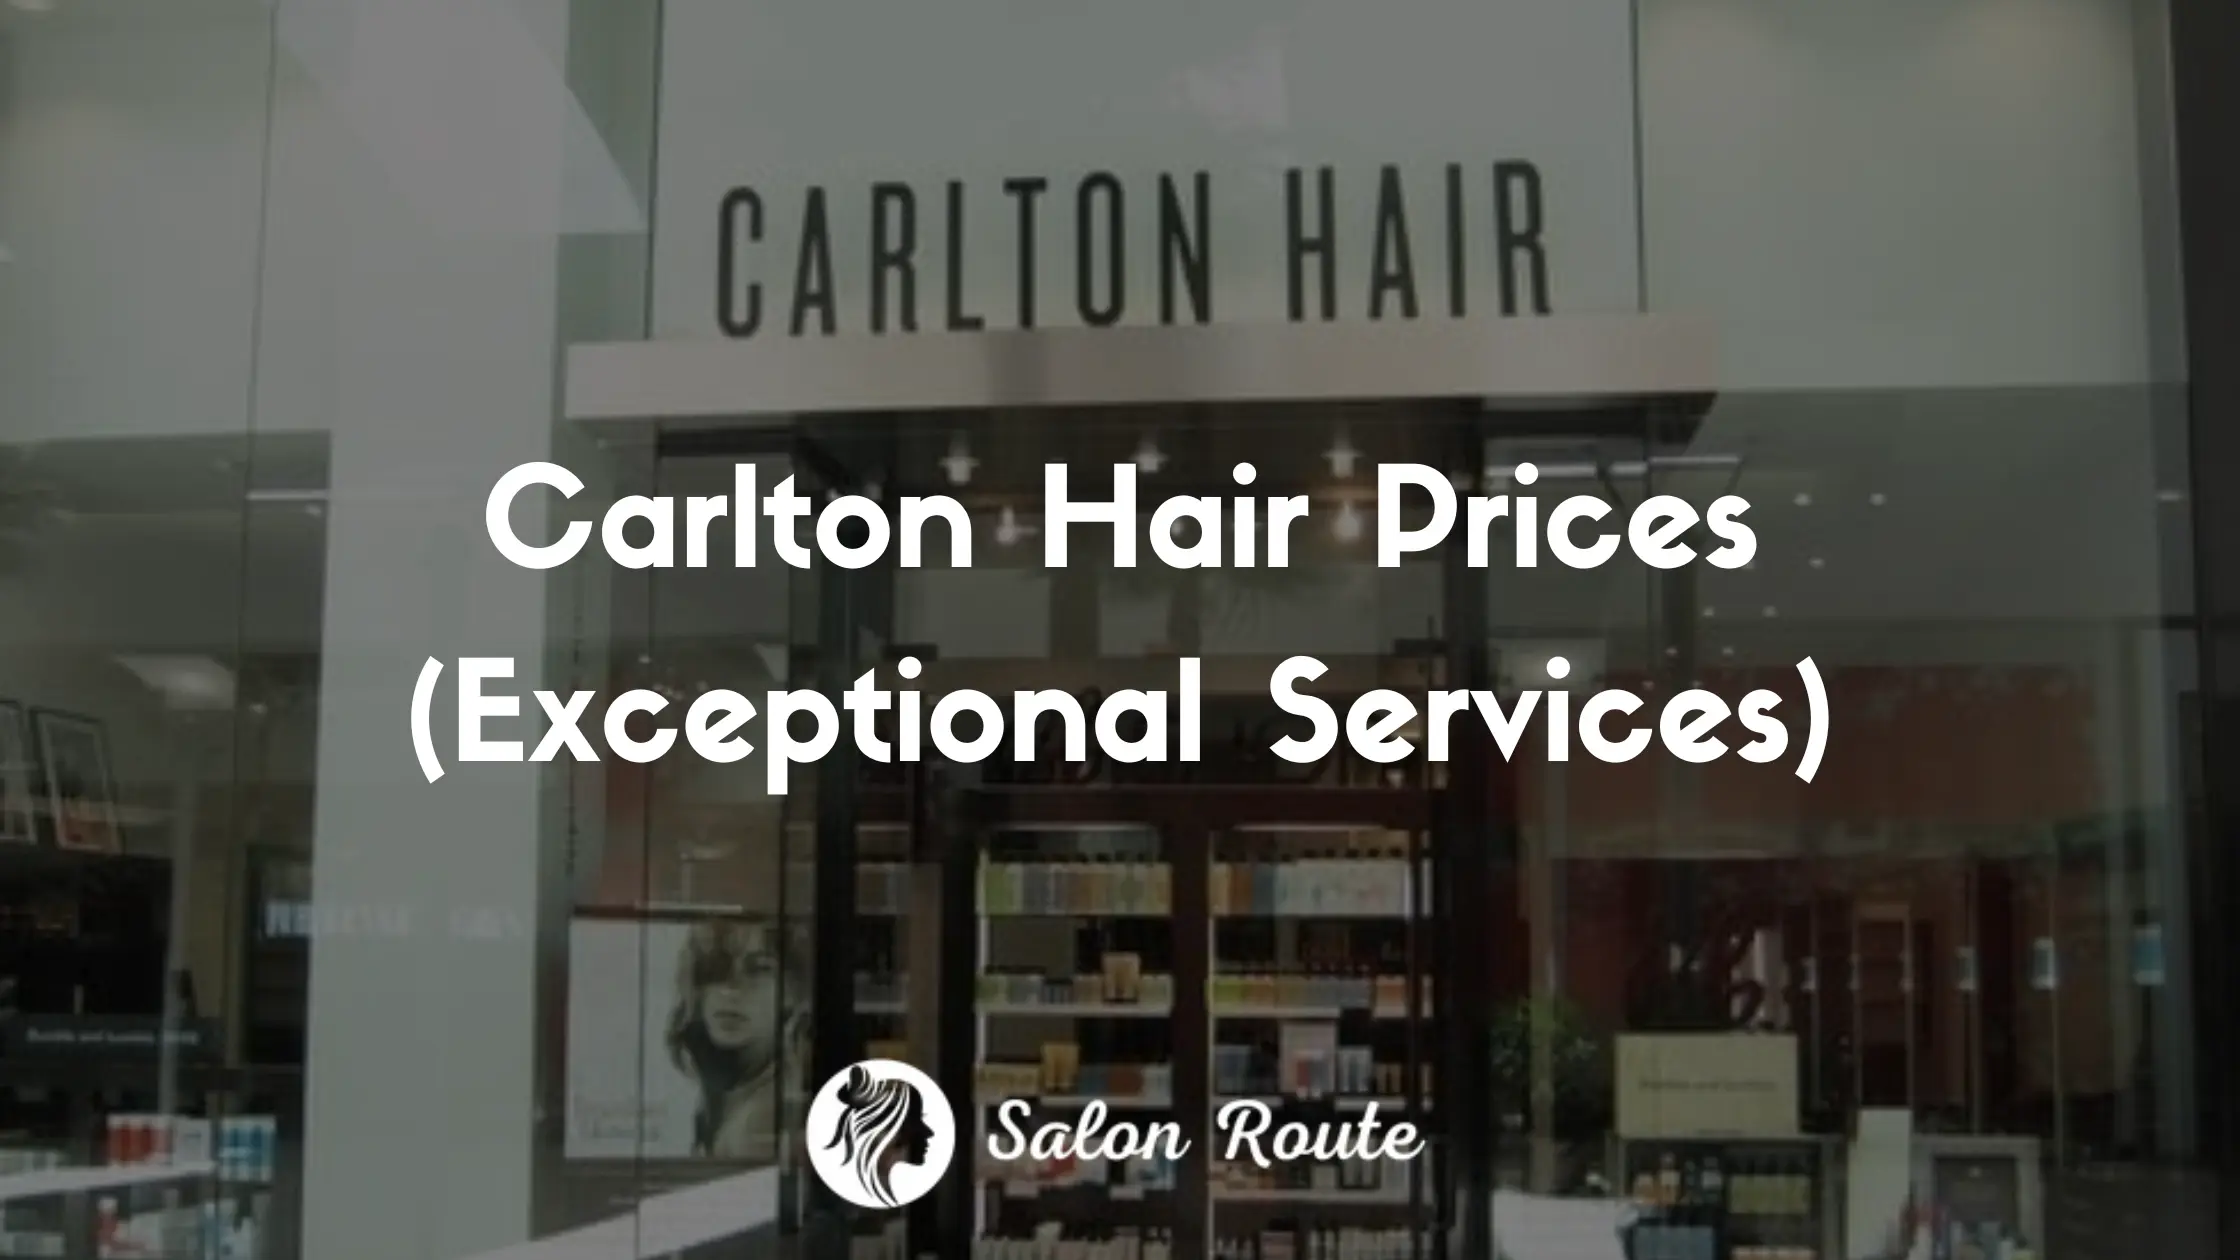 Carlton Hair Prices (Exceptional Services)